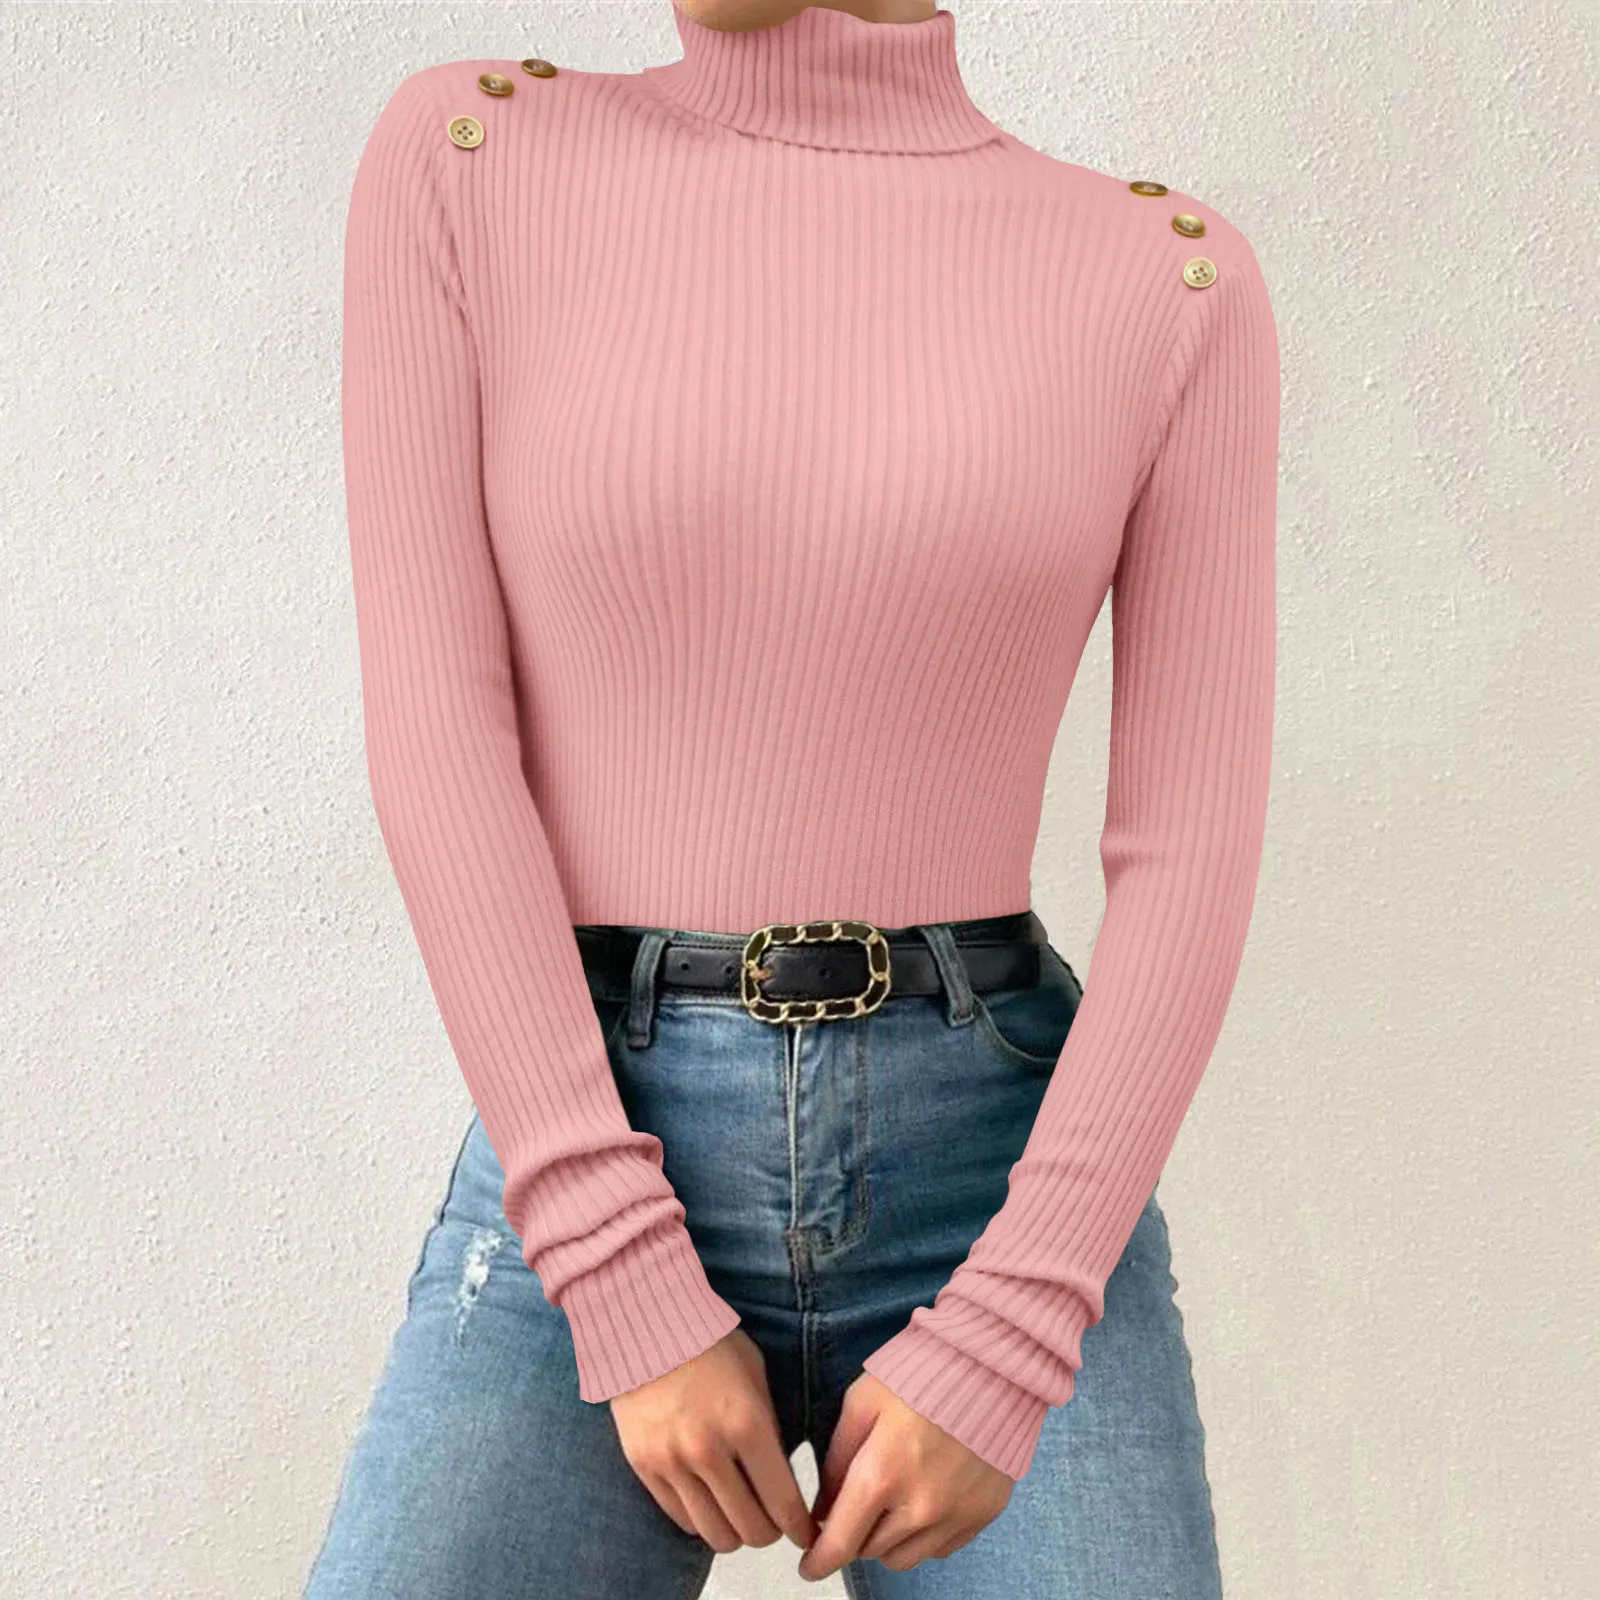 

Women Autumn And Winter Solid Color Turtleneck Bottoming Tops Long Sleeve Button Decorated Warm Slimming Stretch Knitwear Tops